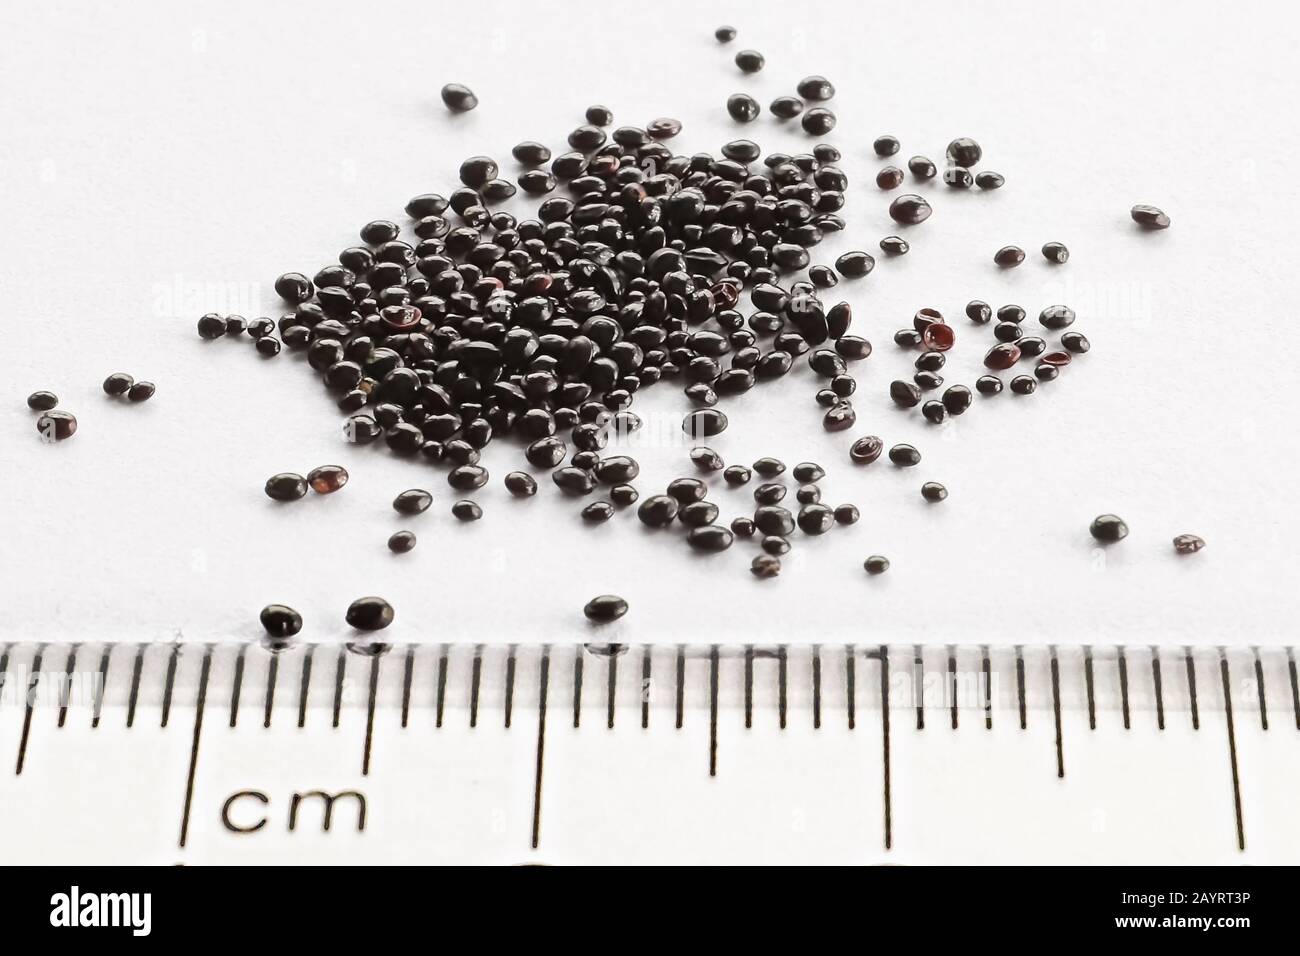 Tiny black lithops seeds against a ruler Stock Photo